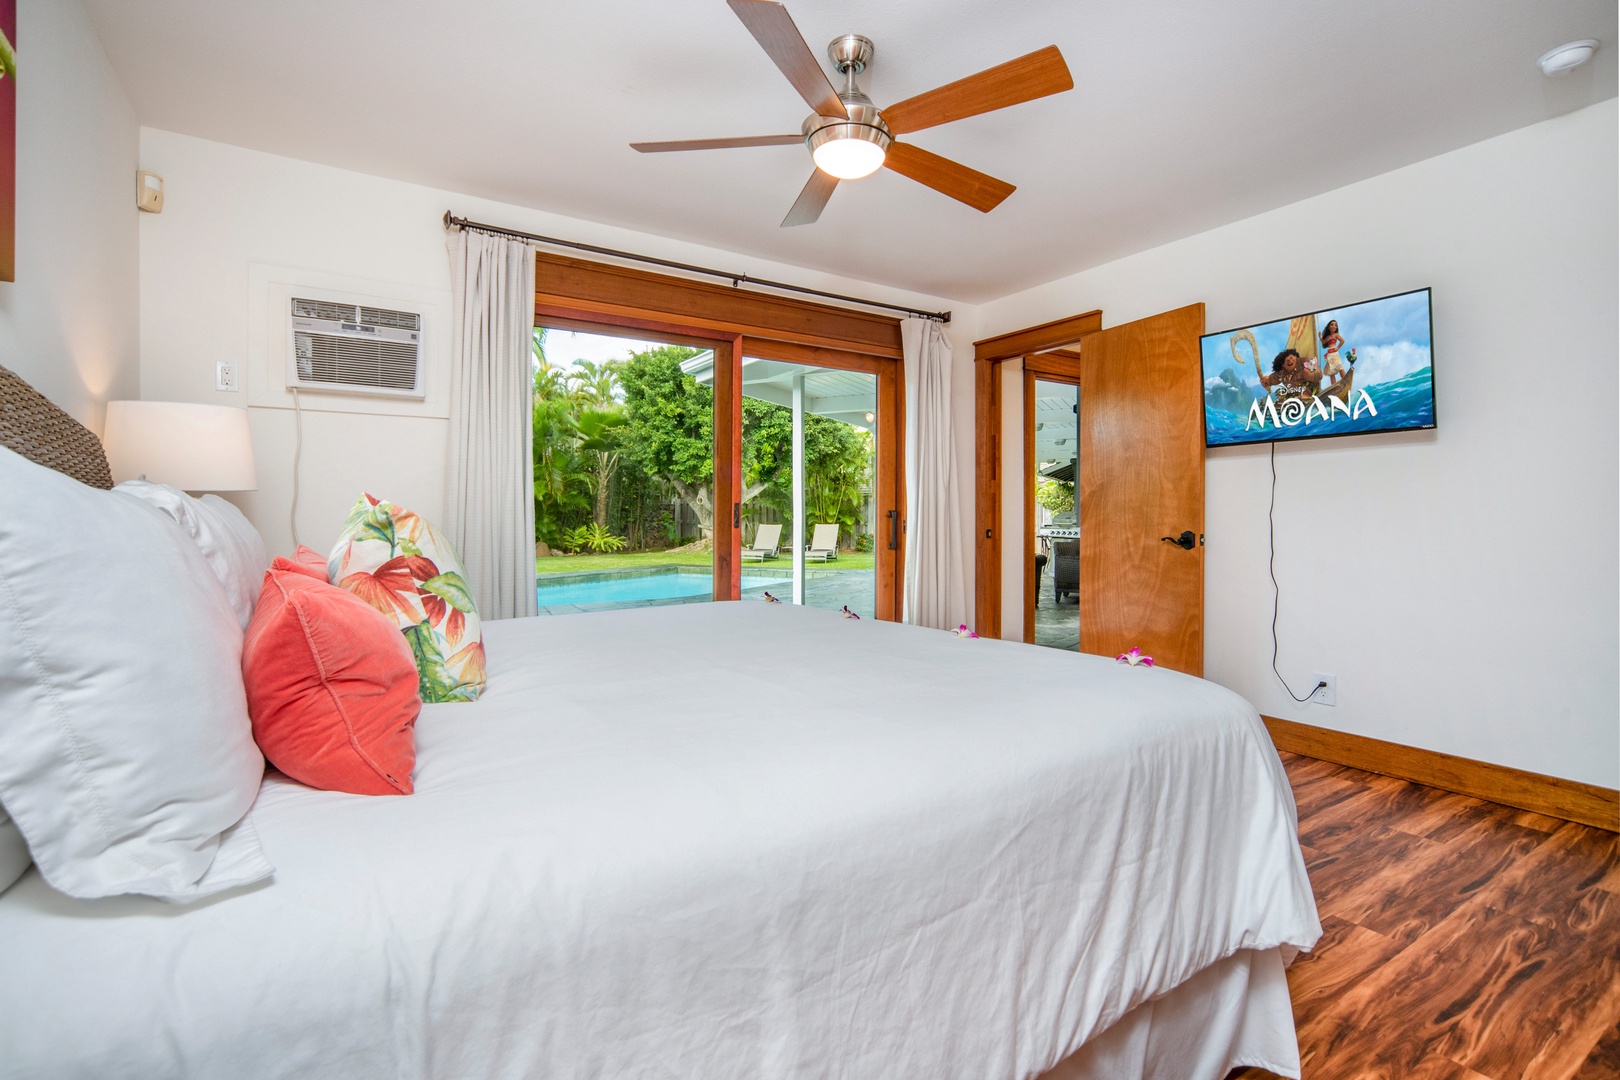 Honolulu Vacation Rentals, Hale Niuiki - Enjoy the luxury of a king bedroom with ceiling fans